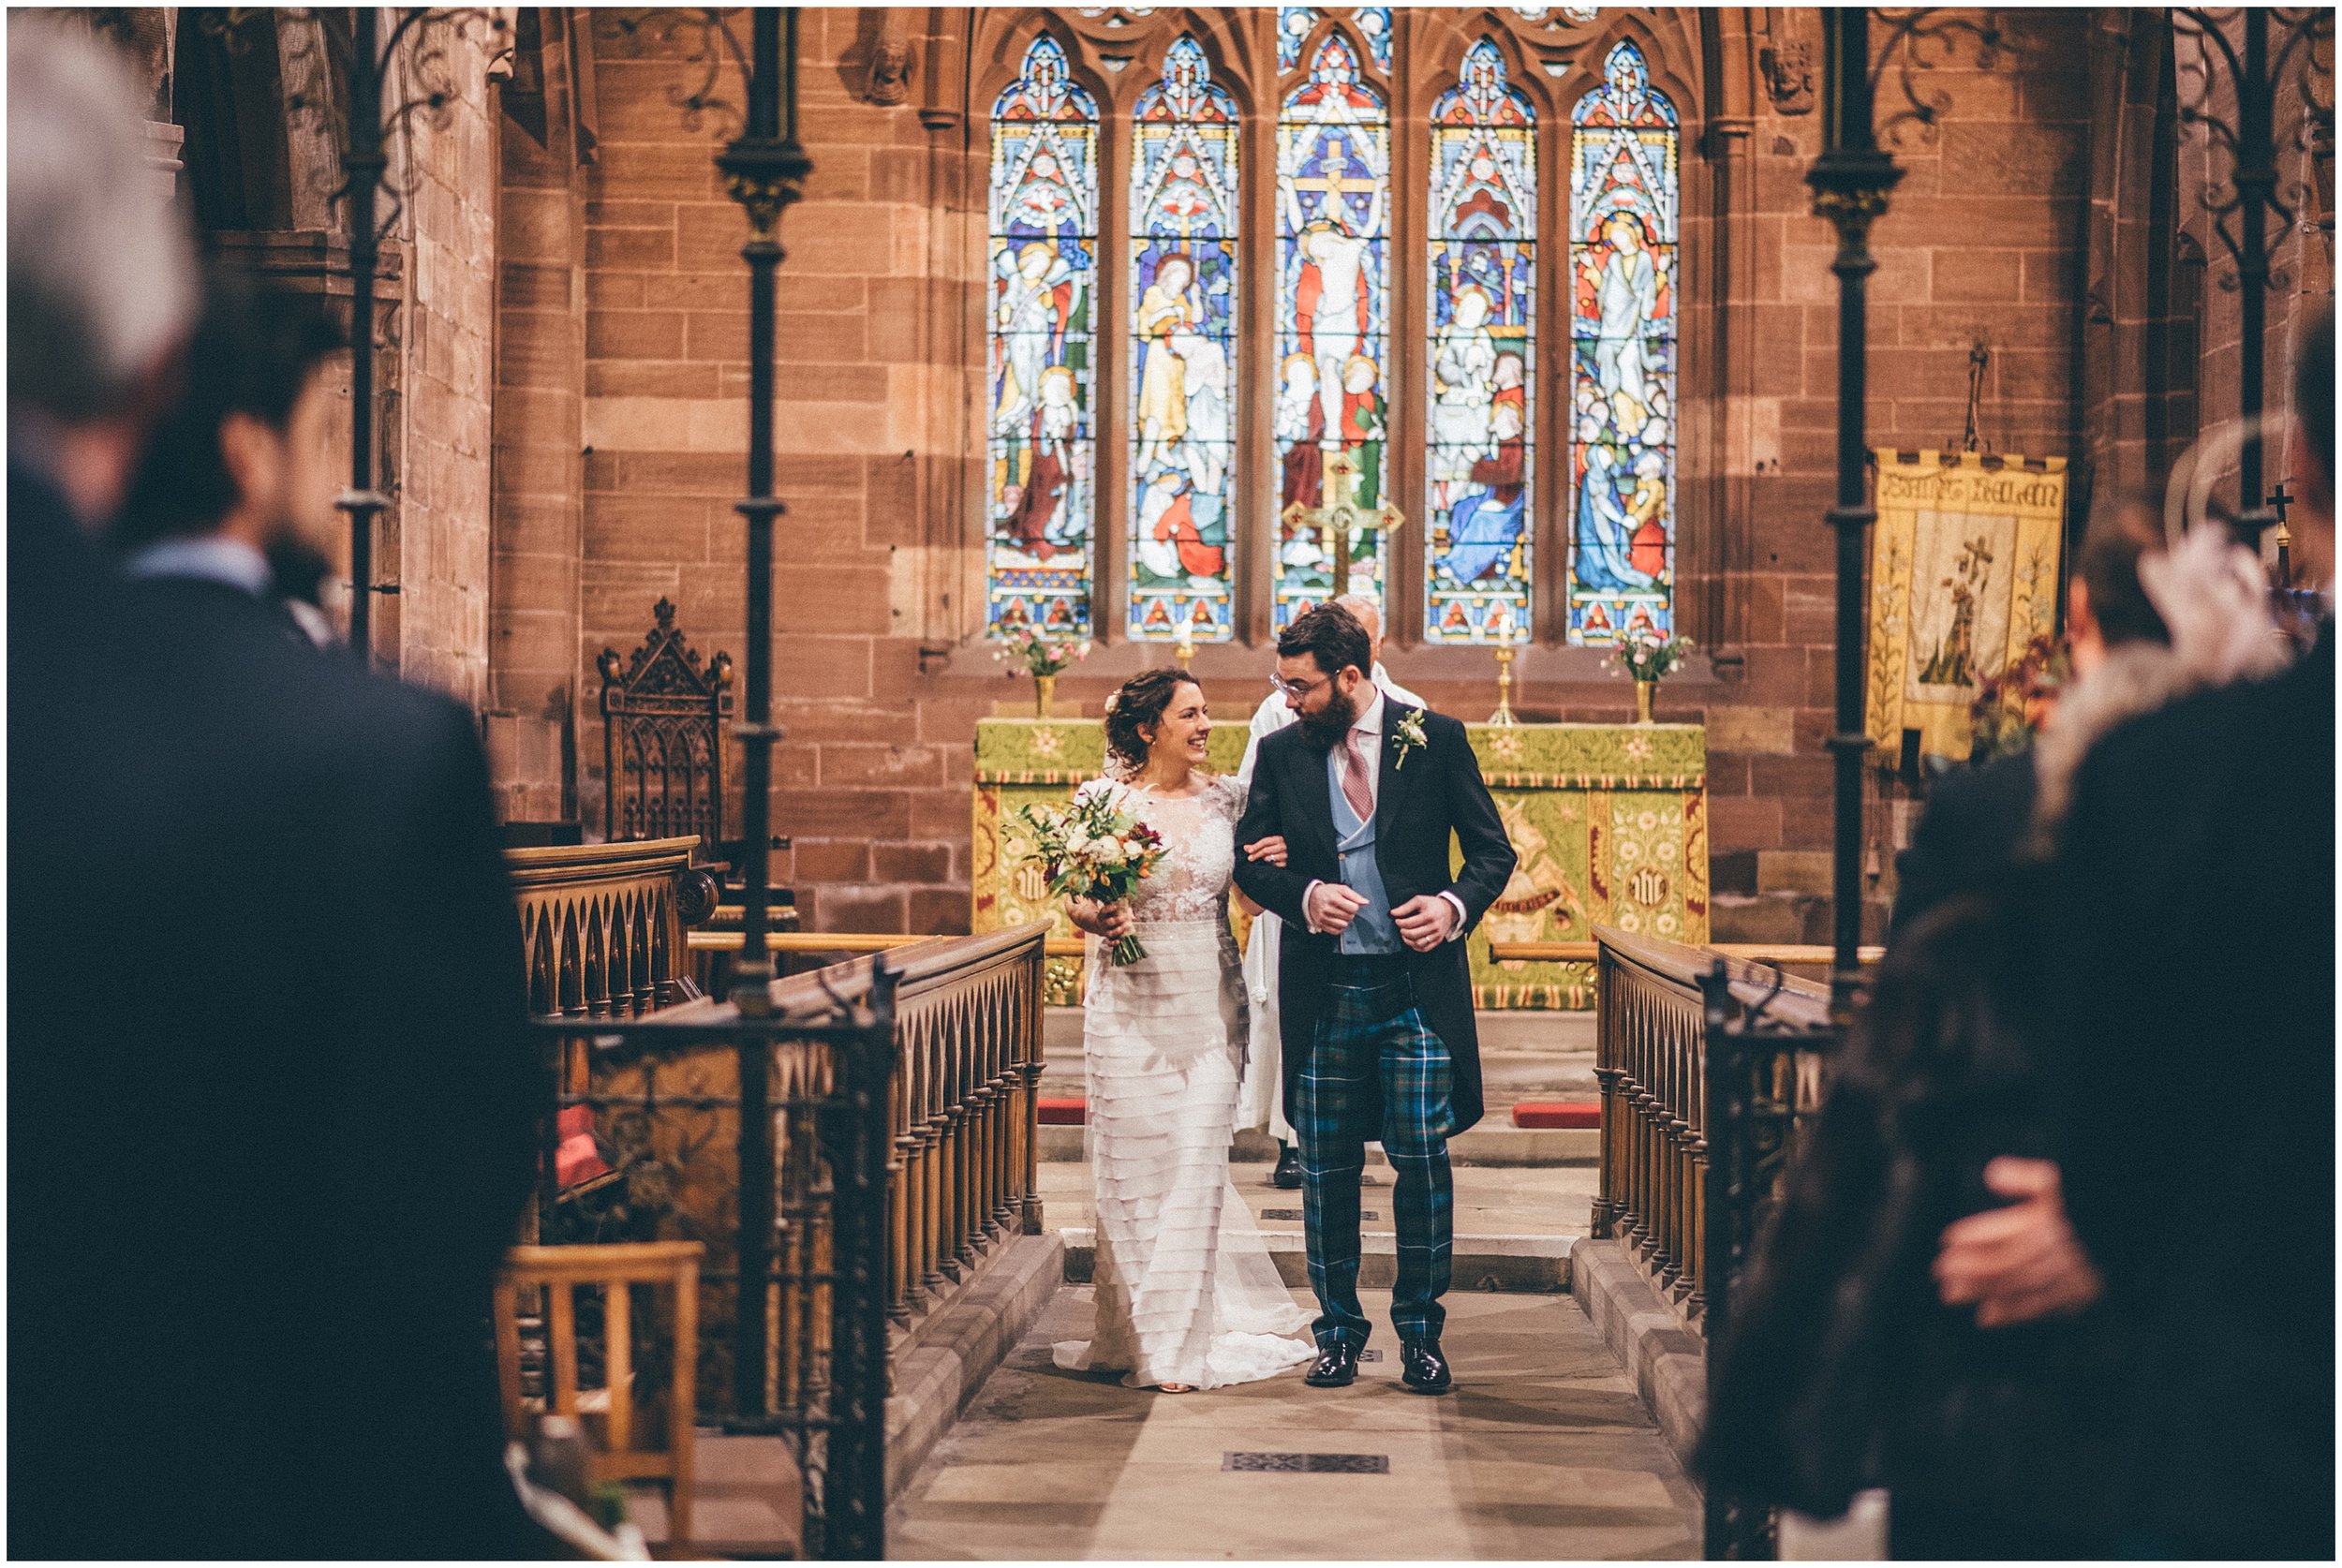 New husband and wife walk down the aisle in Cheshire